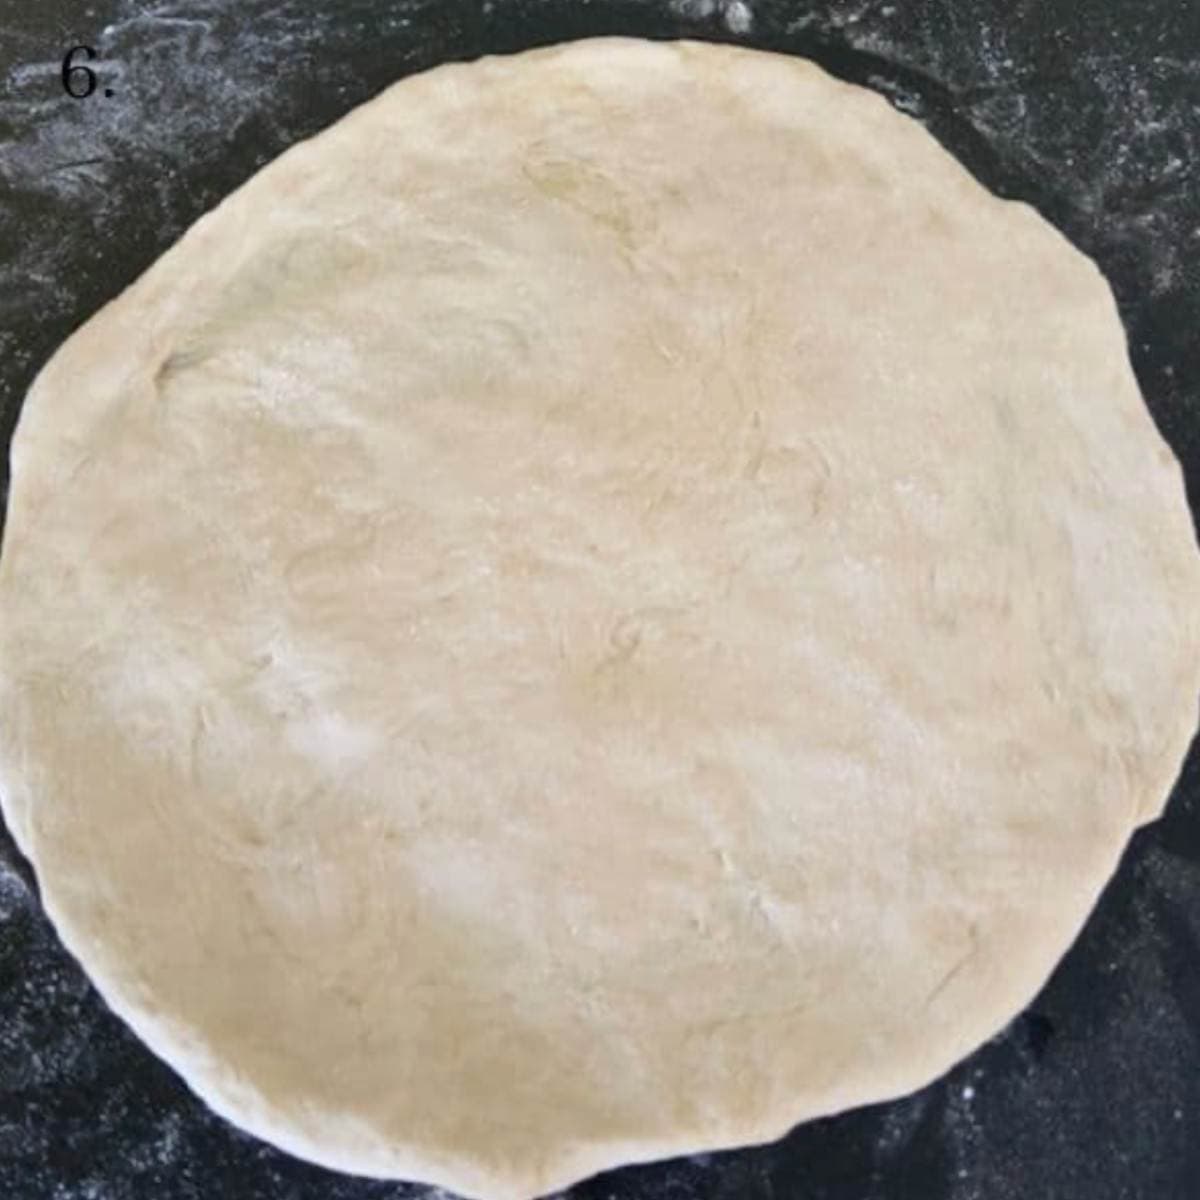 Rolled out pizza dough.